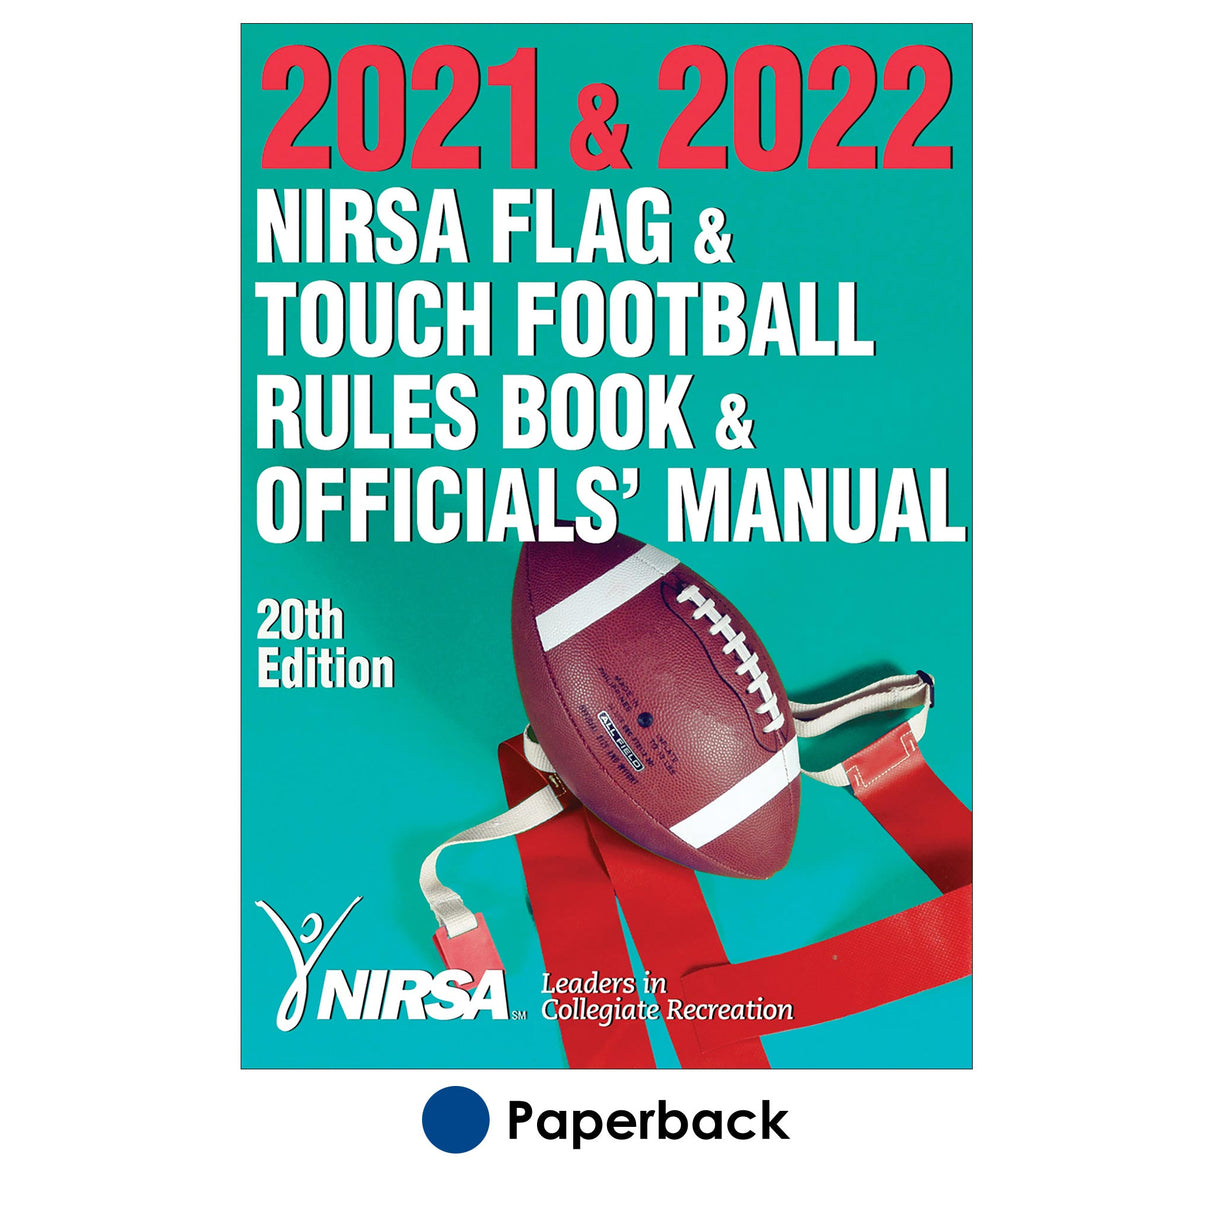 2021 & 2022 NIRSA Flag & Touch Football Rules Book & Officials' Manual-20th
Edition